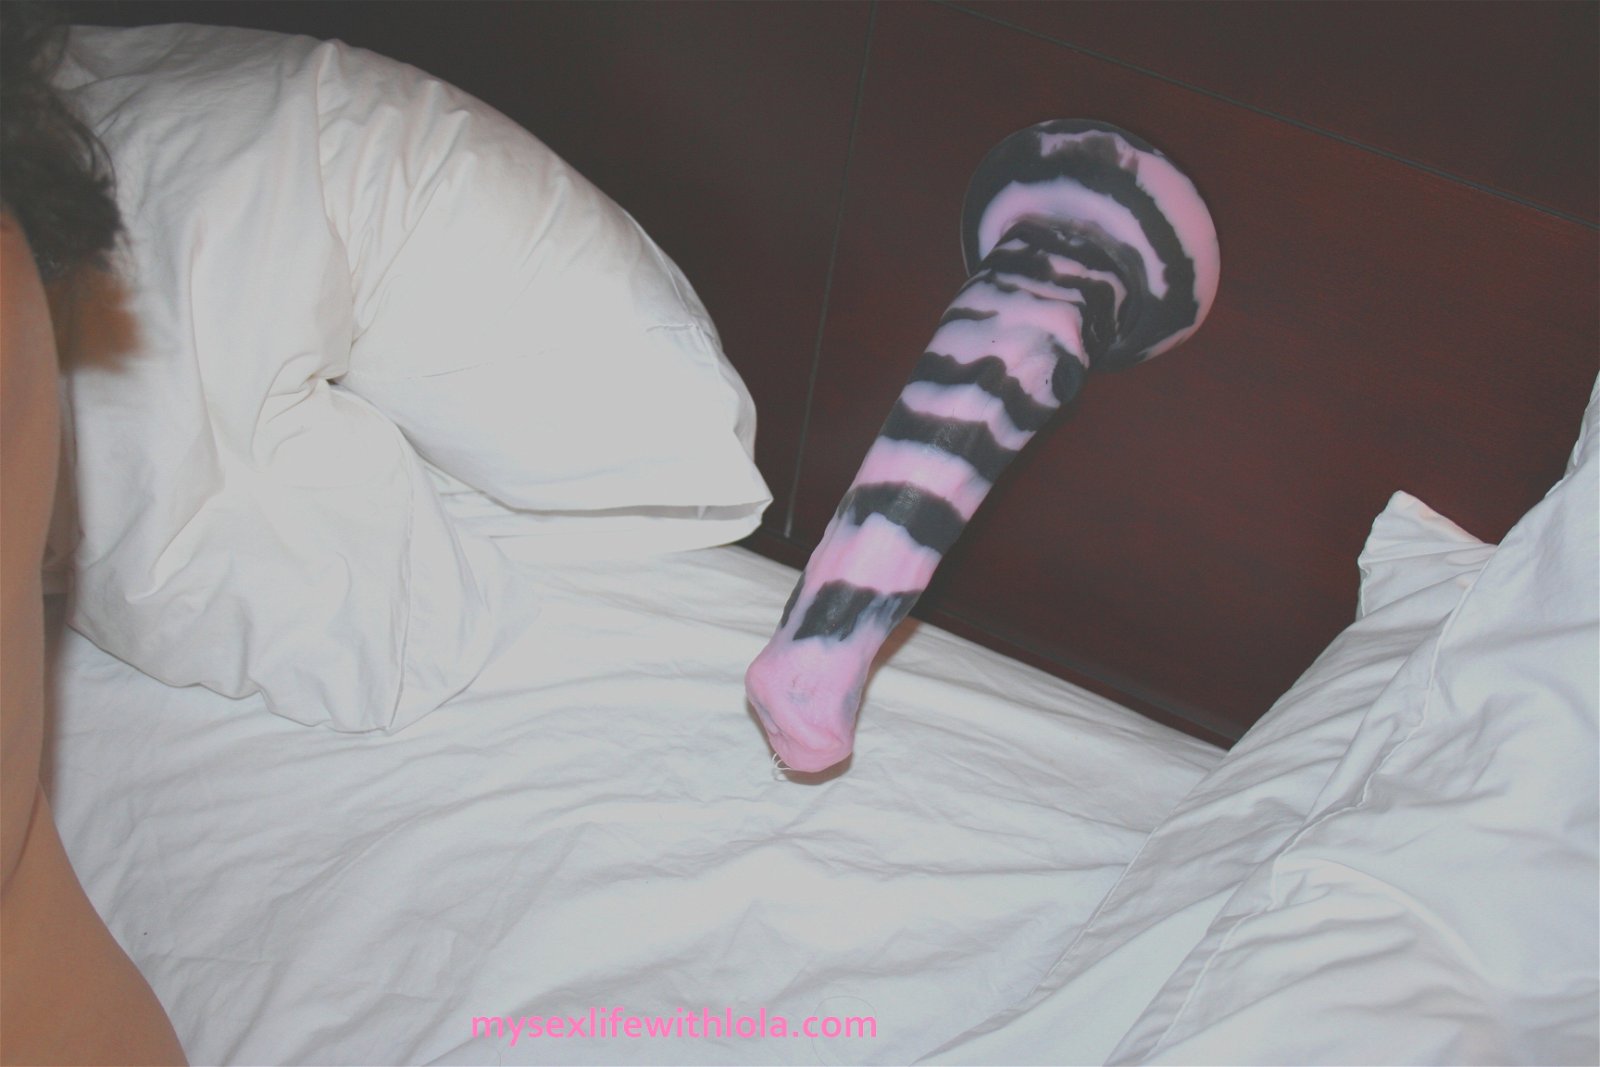 Watch the Photo by oooyear with the username @oooyear, posted on November 11, 2018 and the text says 'dailynymphoblog:My Exotic-Erotics Remus horse-cock dildo.
wow a new one, please post more, thanks xx #horse  #dildo'